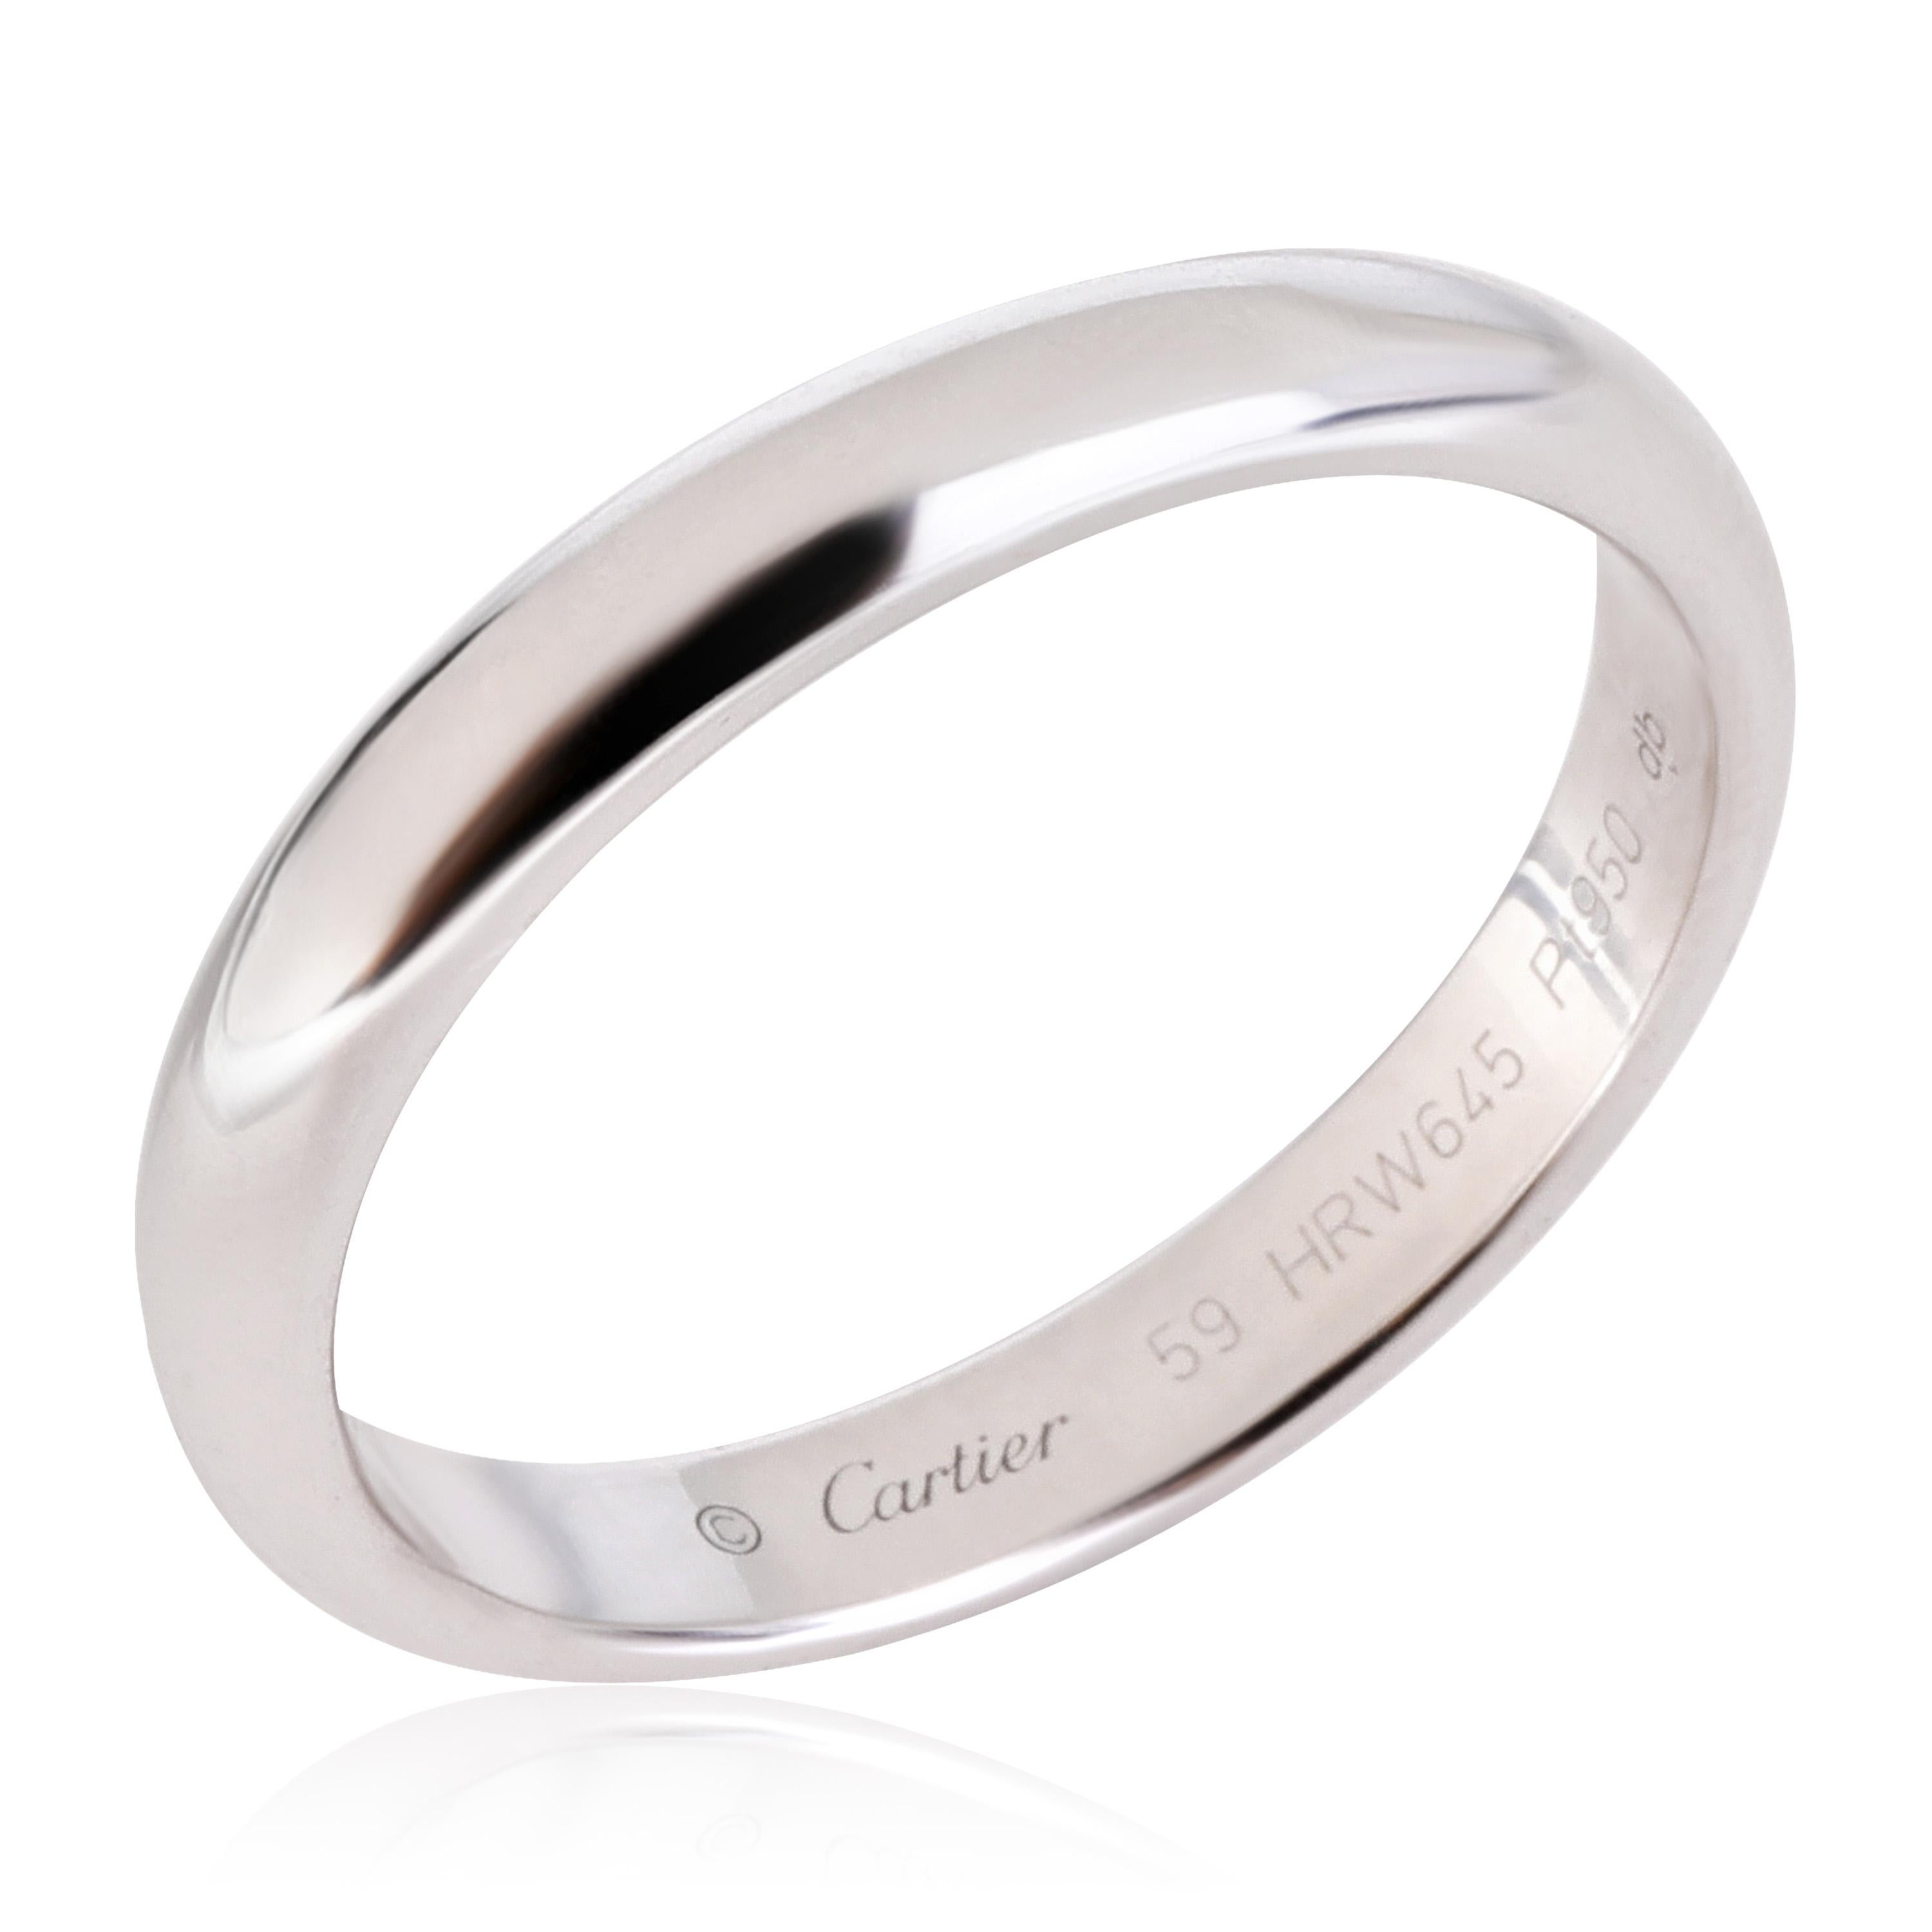 Cartier 1895 Wedding Band in Platinum

PRIMARY DETAILS
SKU: 119561
Listing Title: Cartier 1895 Wedding Band in Platinum
Condition Description: Retails for 1700 USD. In excellent condition and recently polished. Ring size is 8.75.Comes with